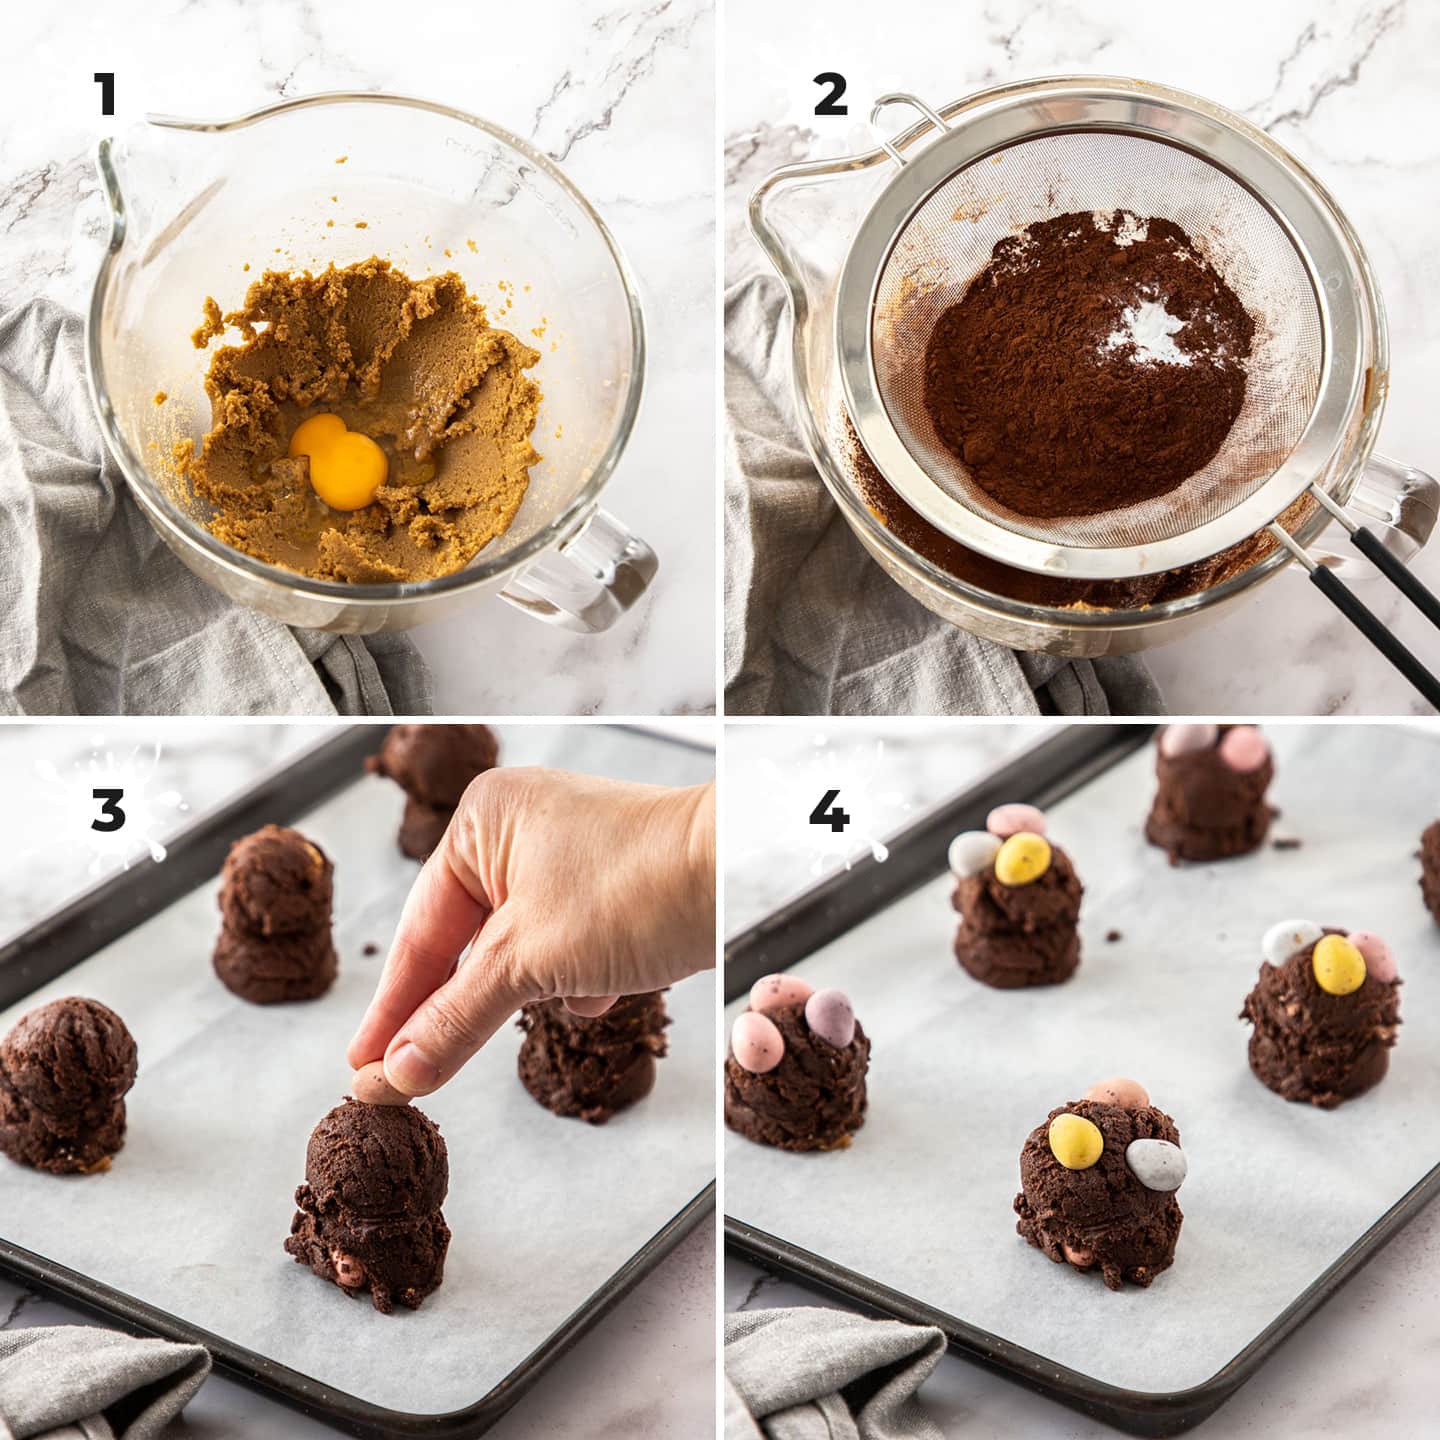 4 images showing putting together cookie dough.